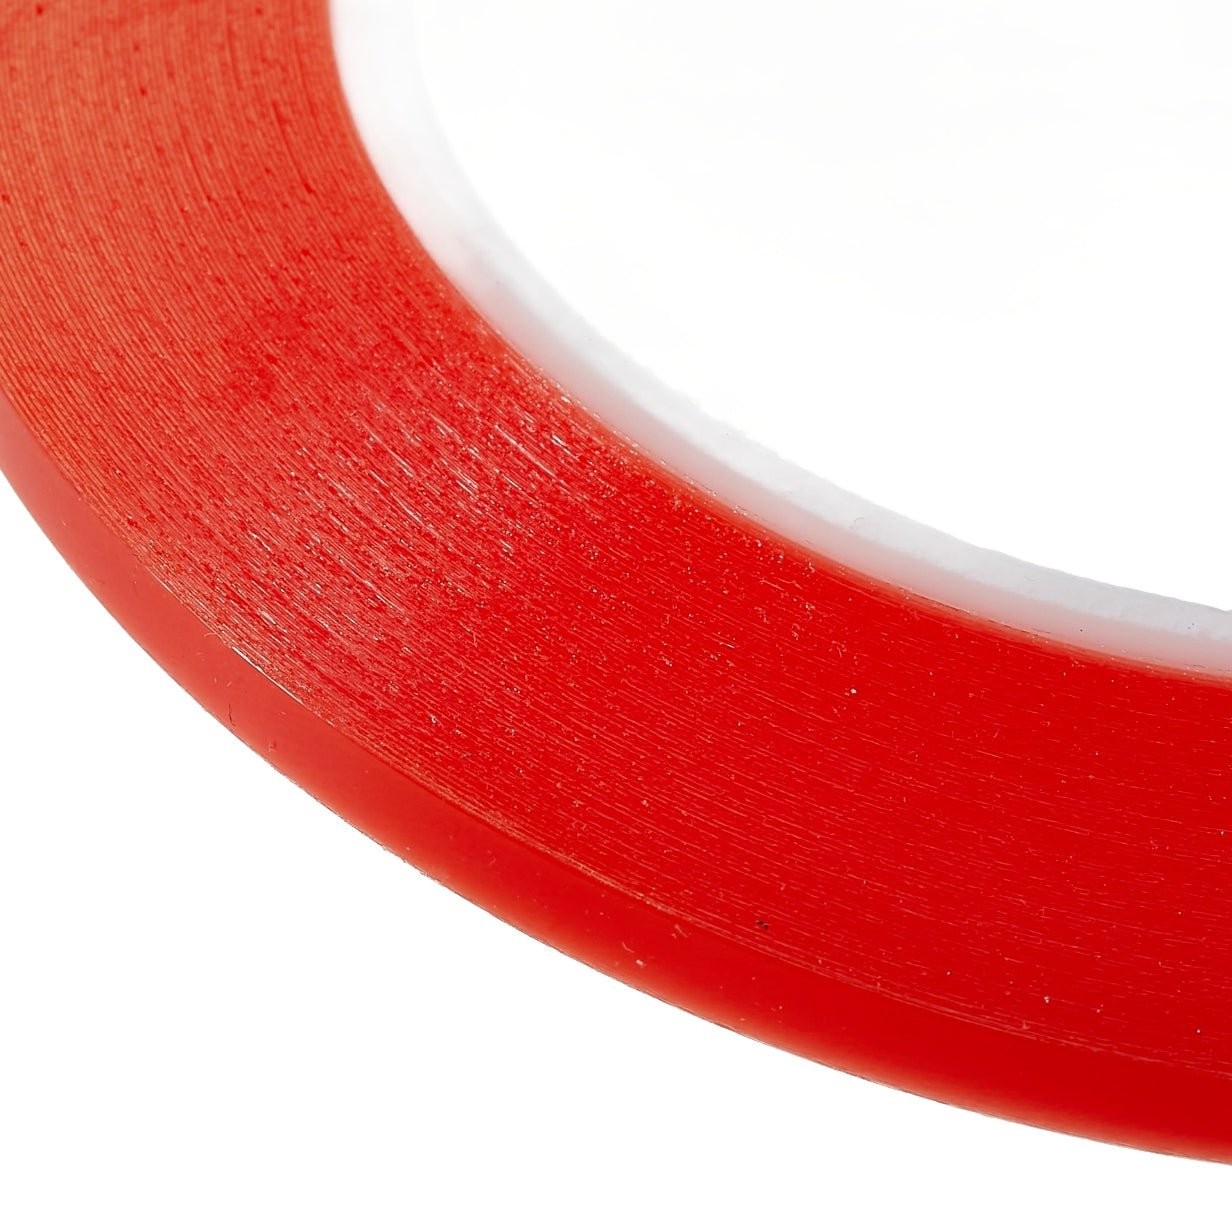 Uniqkart 0.5cmx25m Strong Adhesive Double-sided Tape Ultra-thin Seamless Repairing Double-sided Tape - Red